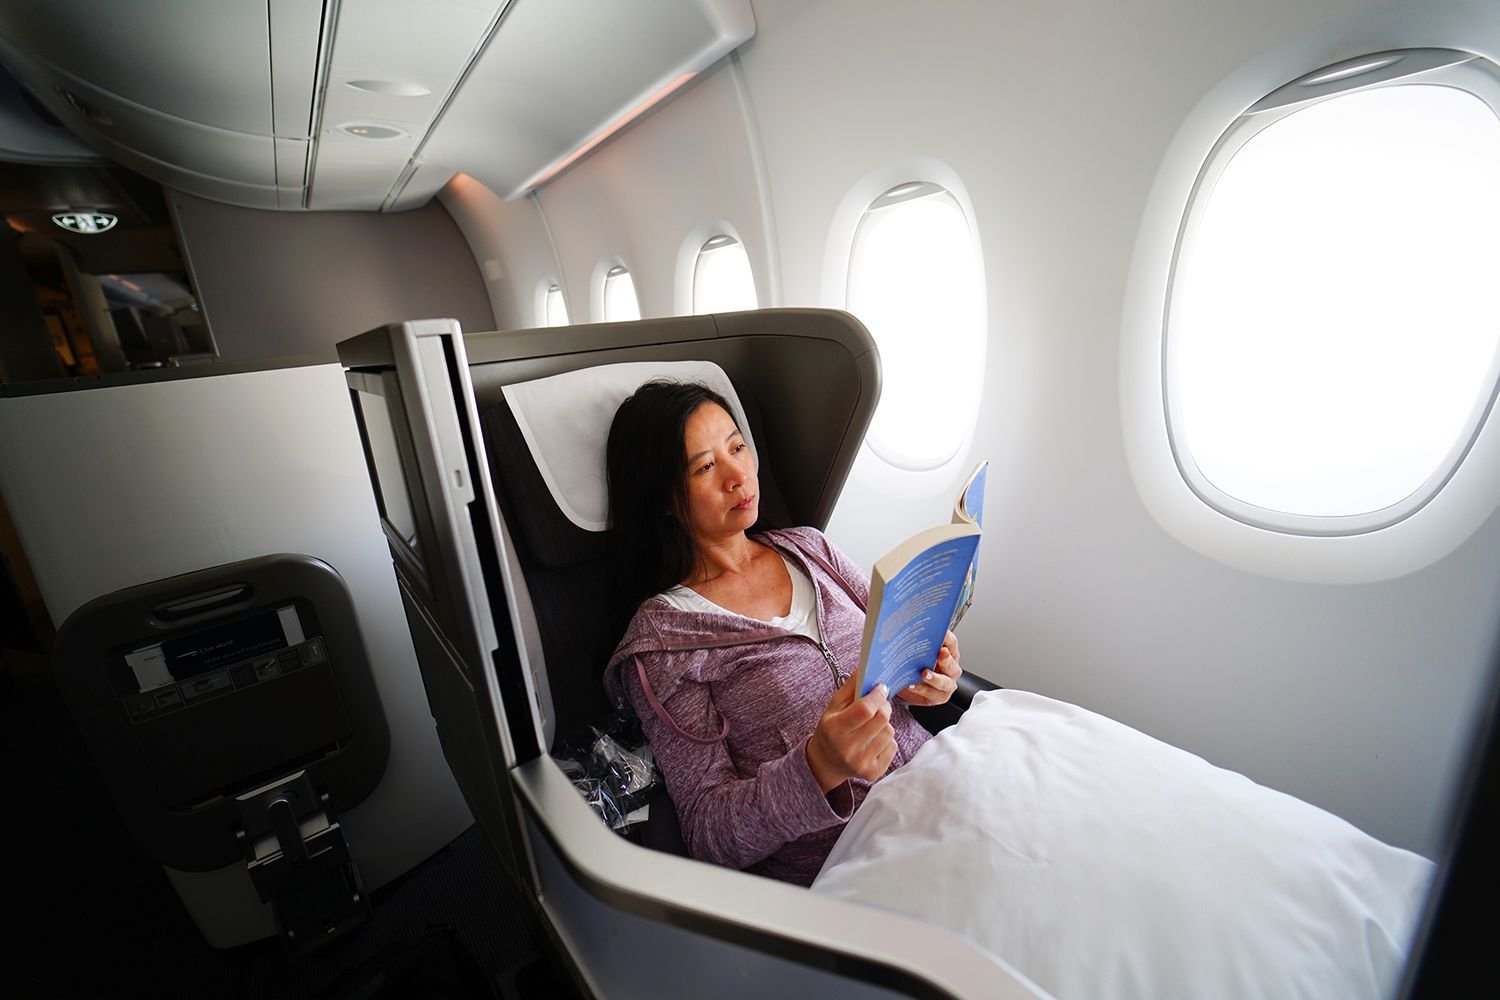 33 Tips for Making a Long-haul Flight More Comfortable